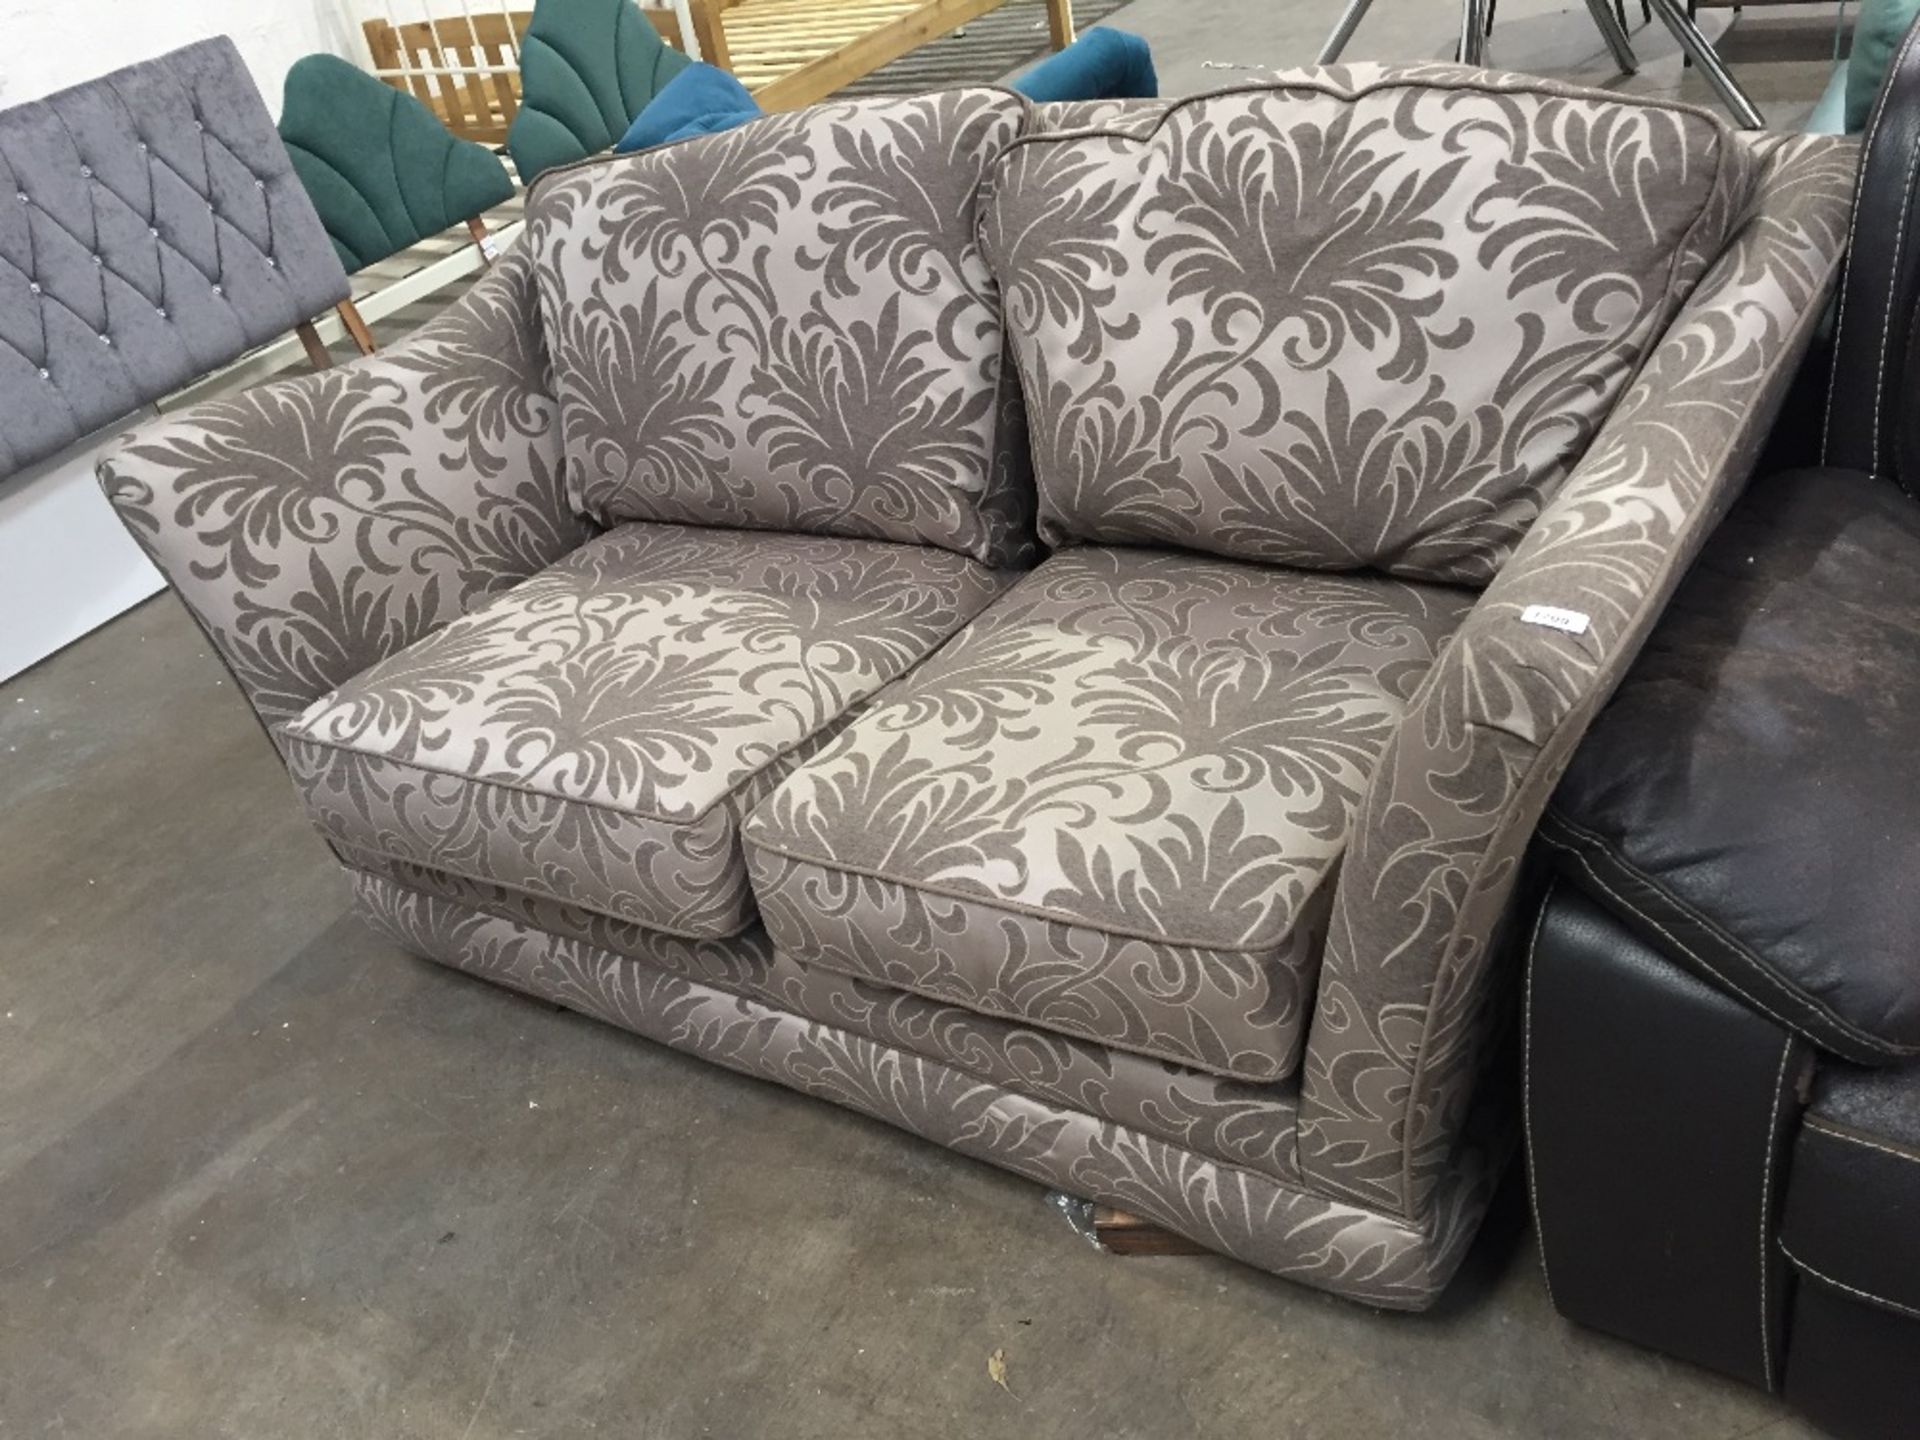 CHOCOLATE FLORAL PATTERNED 2 SEATER SOFA (INCORREC